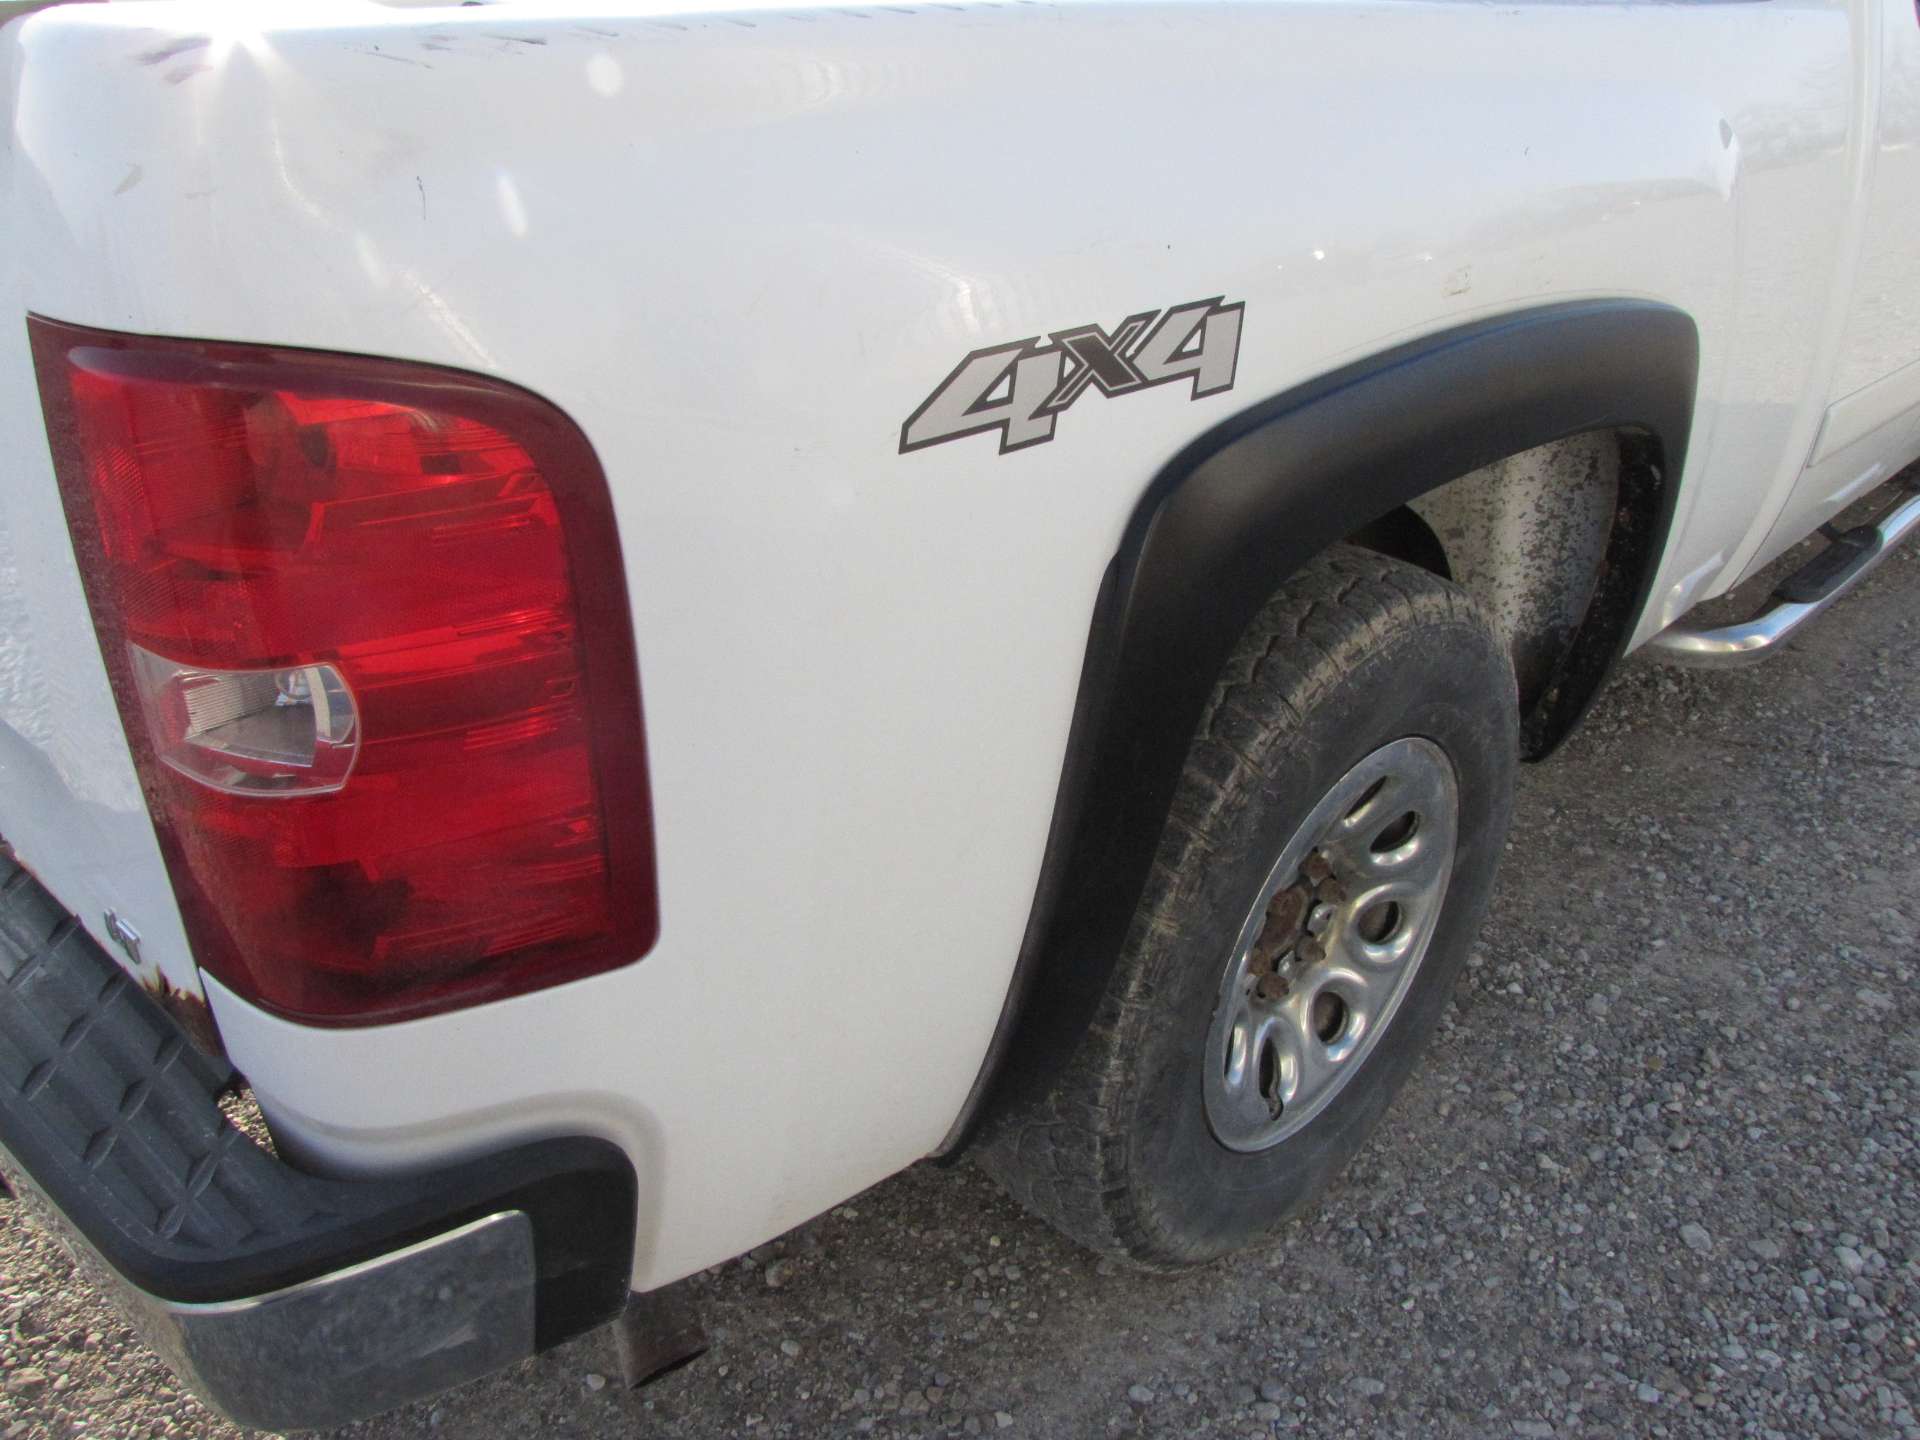 2008 Chevy Silverado 1500 LT Pickup Truck (CRACKED FRAME) - Image 25 of 43